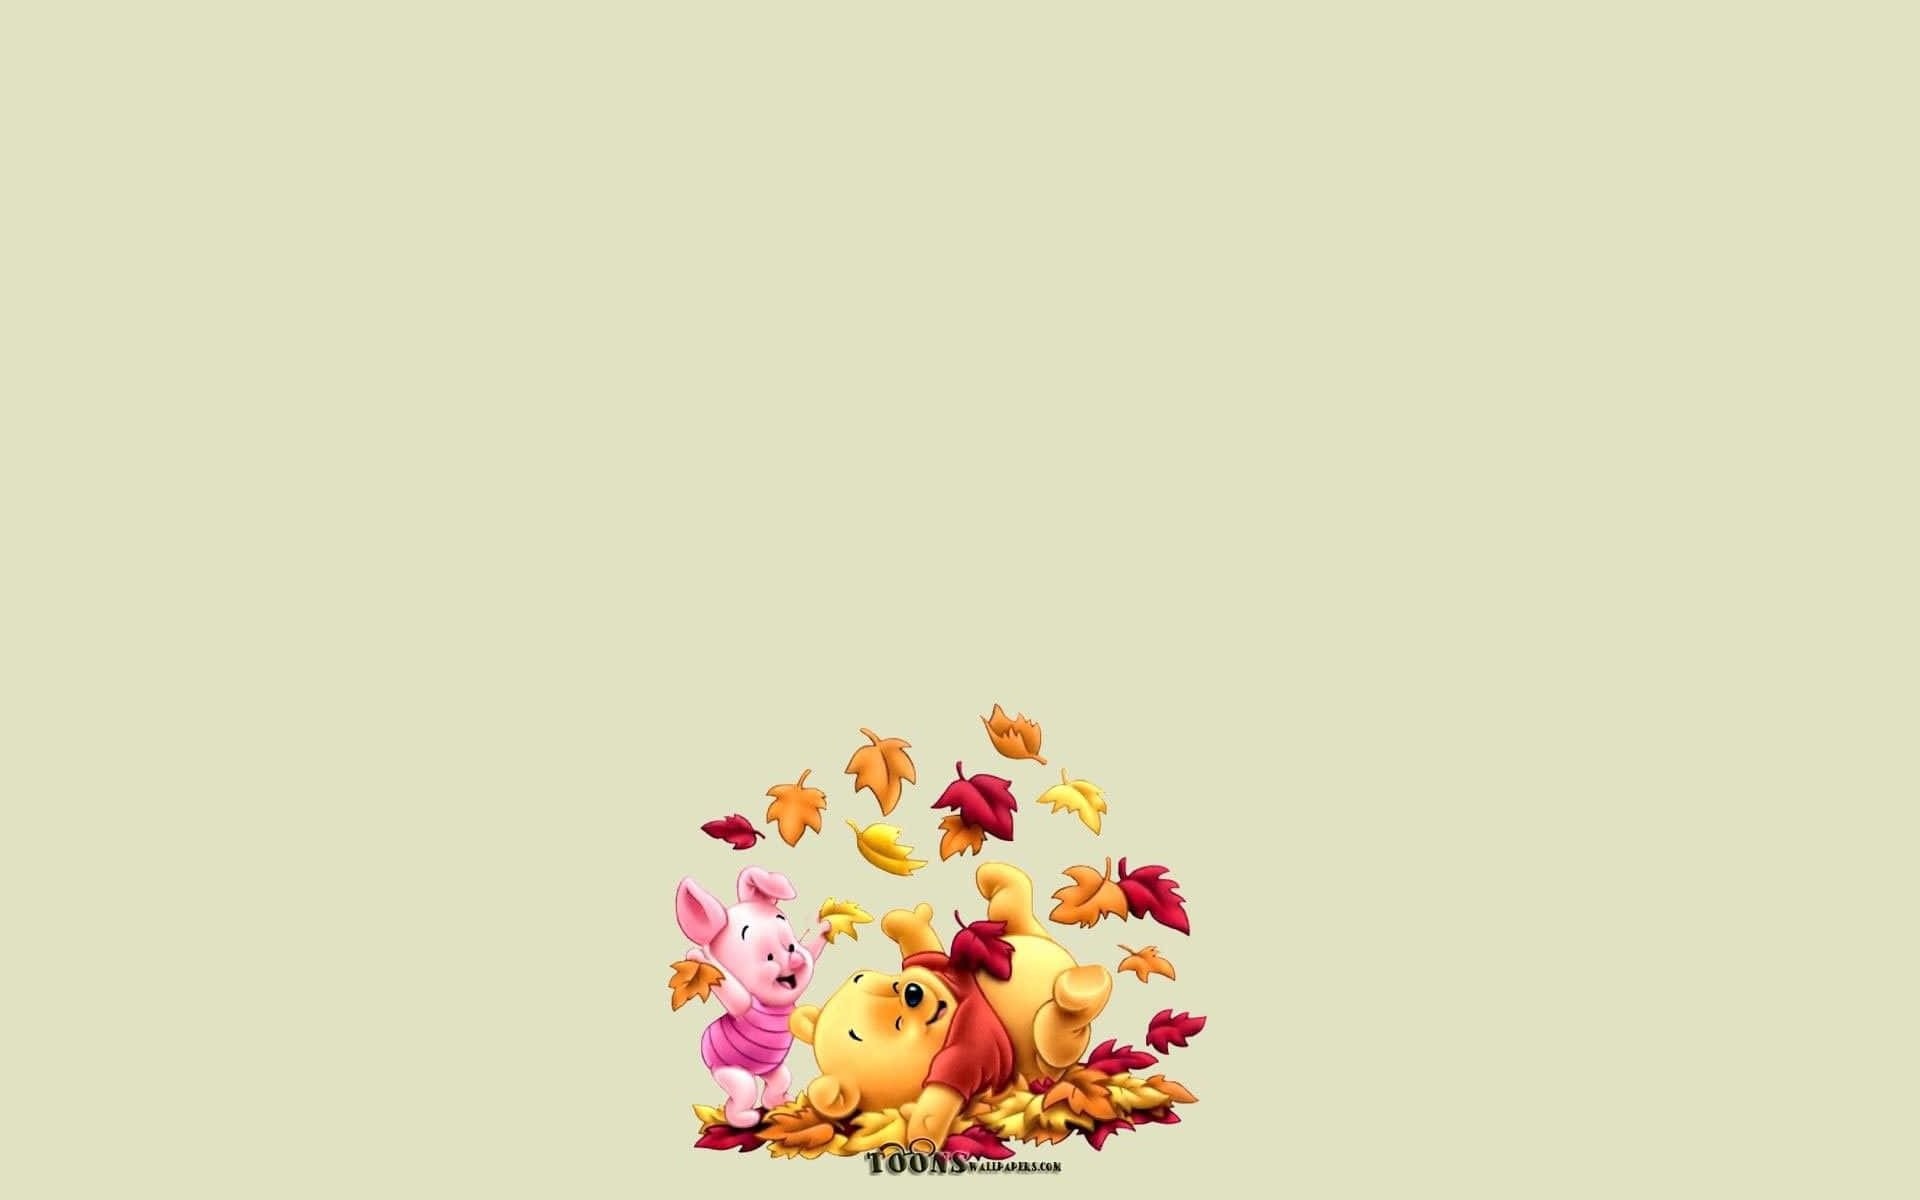 Winnie The Pooh Aesthetic With A Playing Piglet Wallpaper